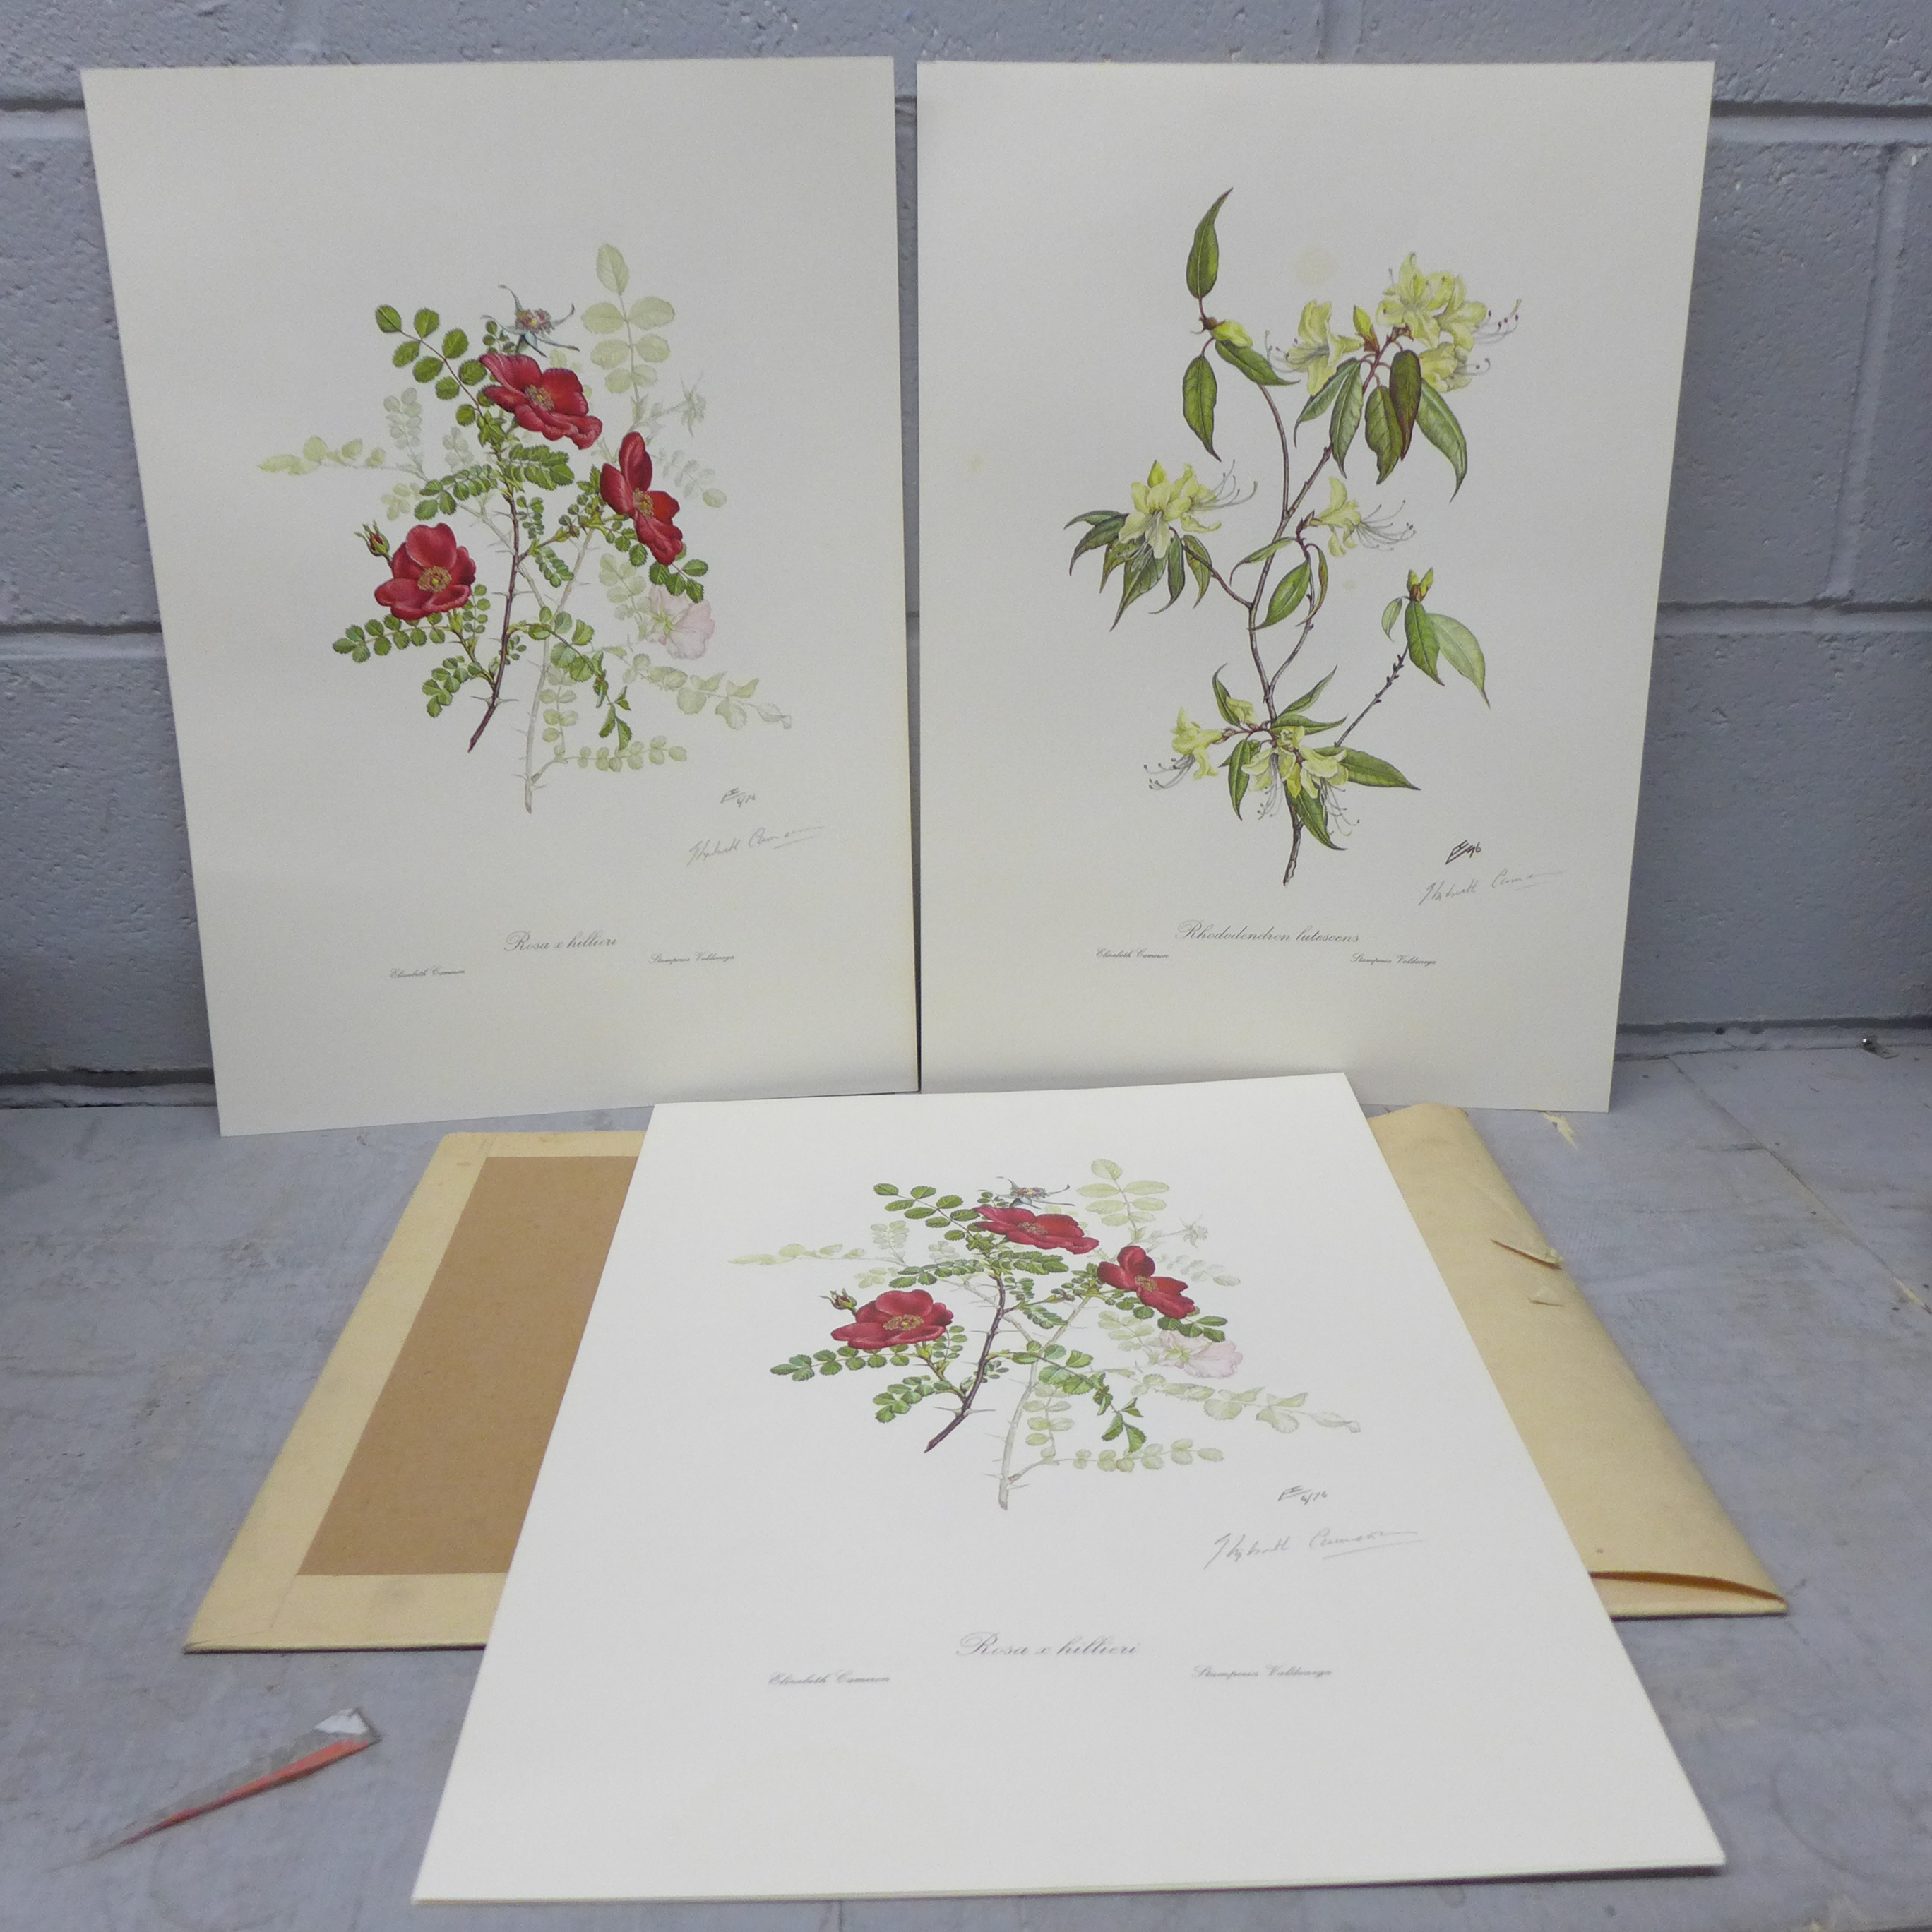 A collection of floral prints by Elizabeth Cameron, hand signed